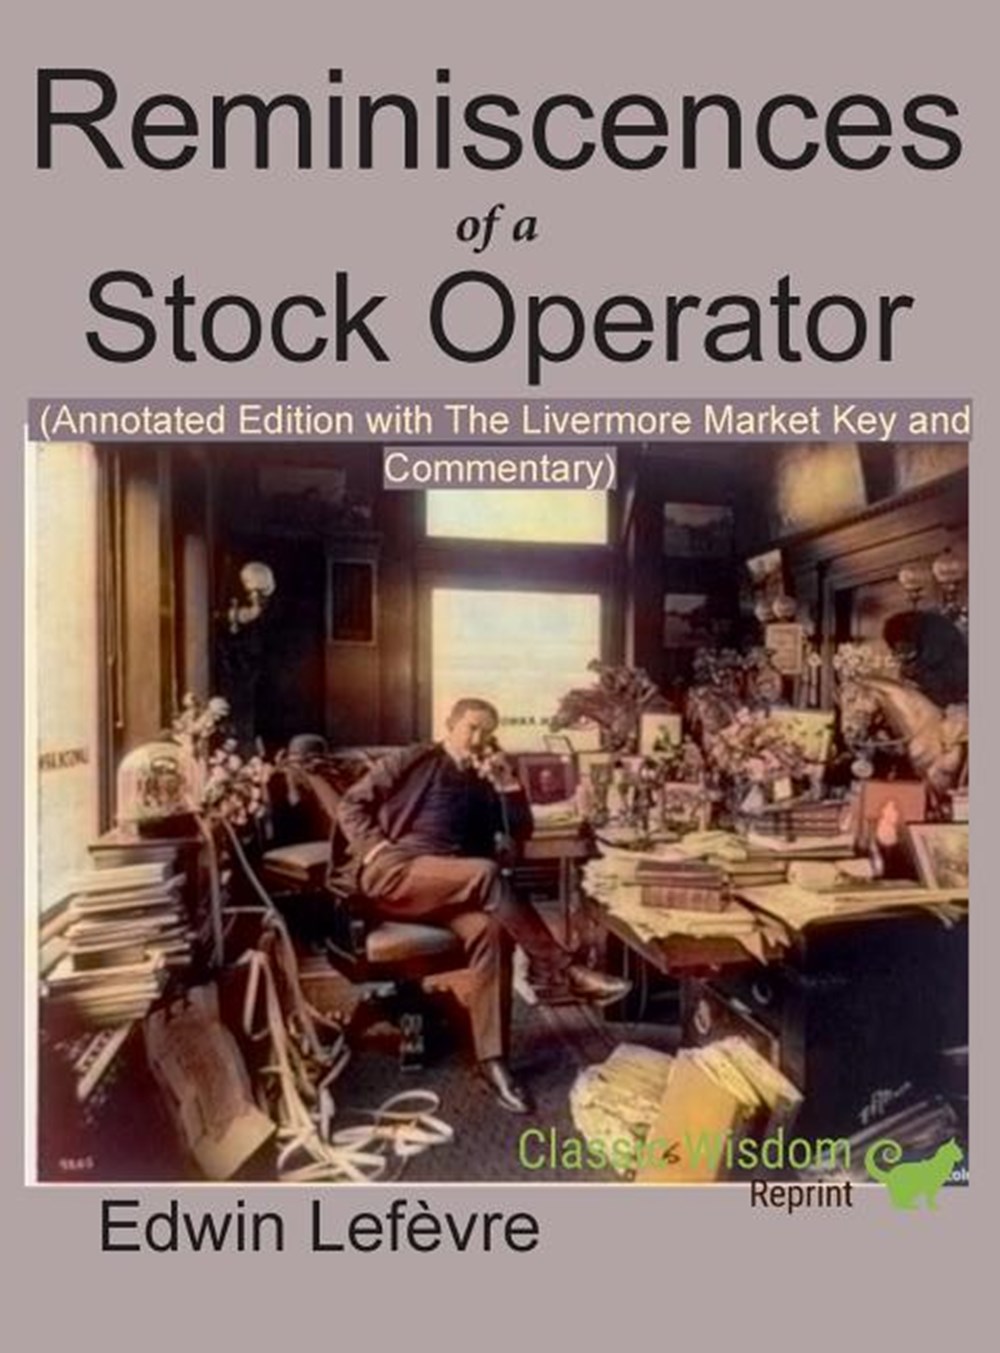 Reminiscences of a Stock Operator (Annotated Edition): with the Livermore Market Key and Commentary 